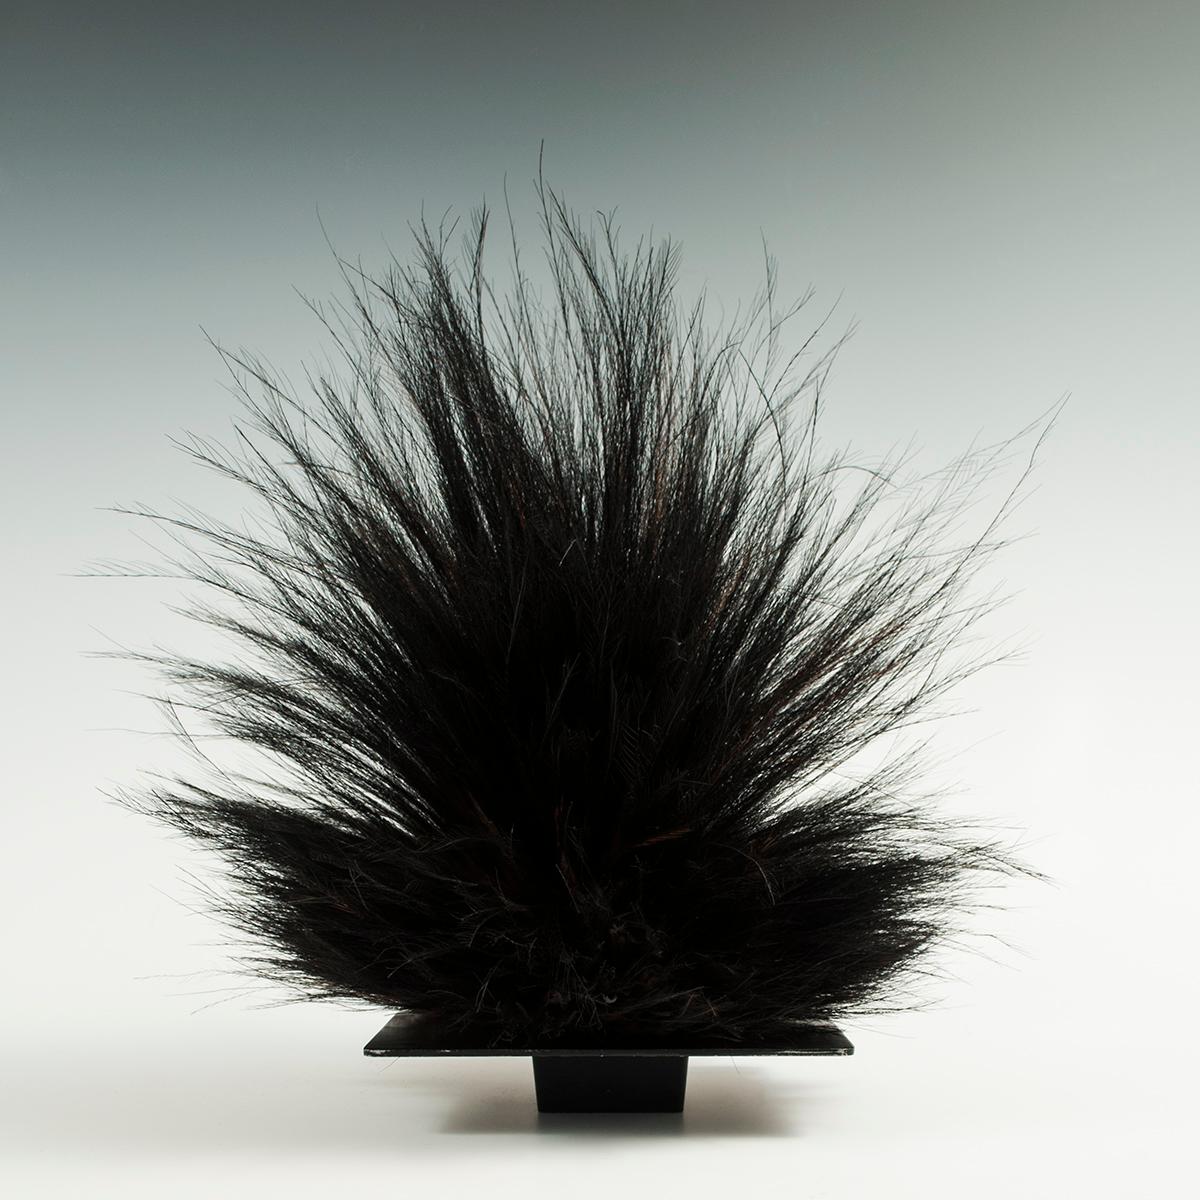 Offered by Zena Kruzick
Mid-20th century Cassowary feather headdress, Western Highlands, Papua New Guinea

This cassowary feather headdress is placed on a black metal frog, which will be included if desired. It's in great condition, with clean